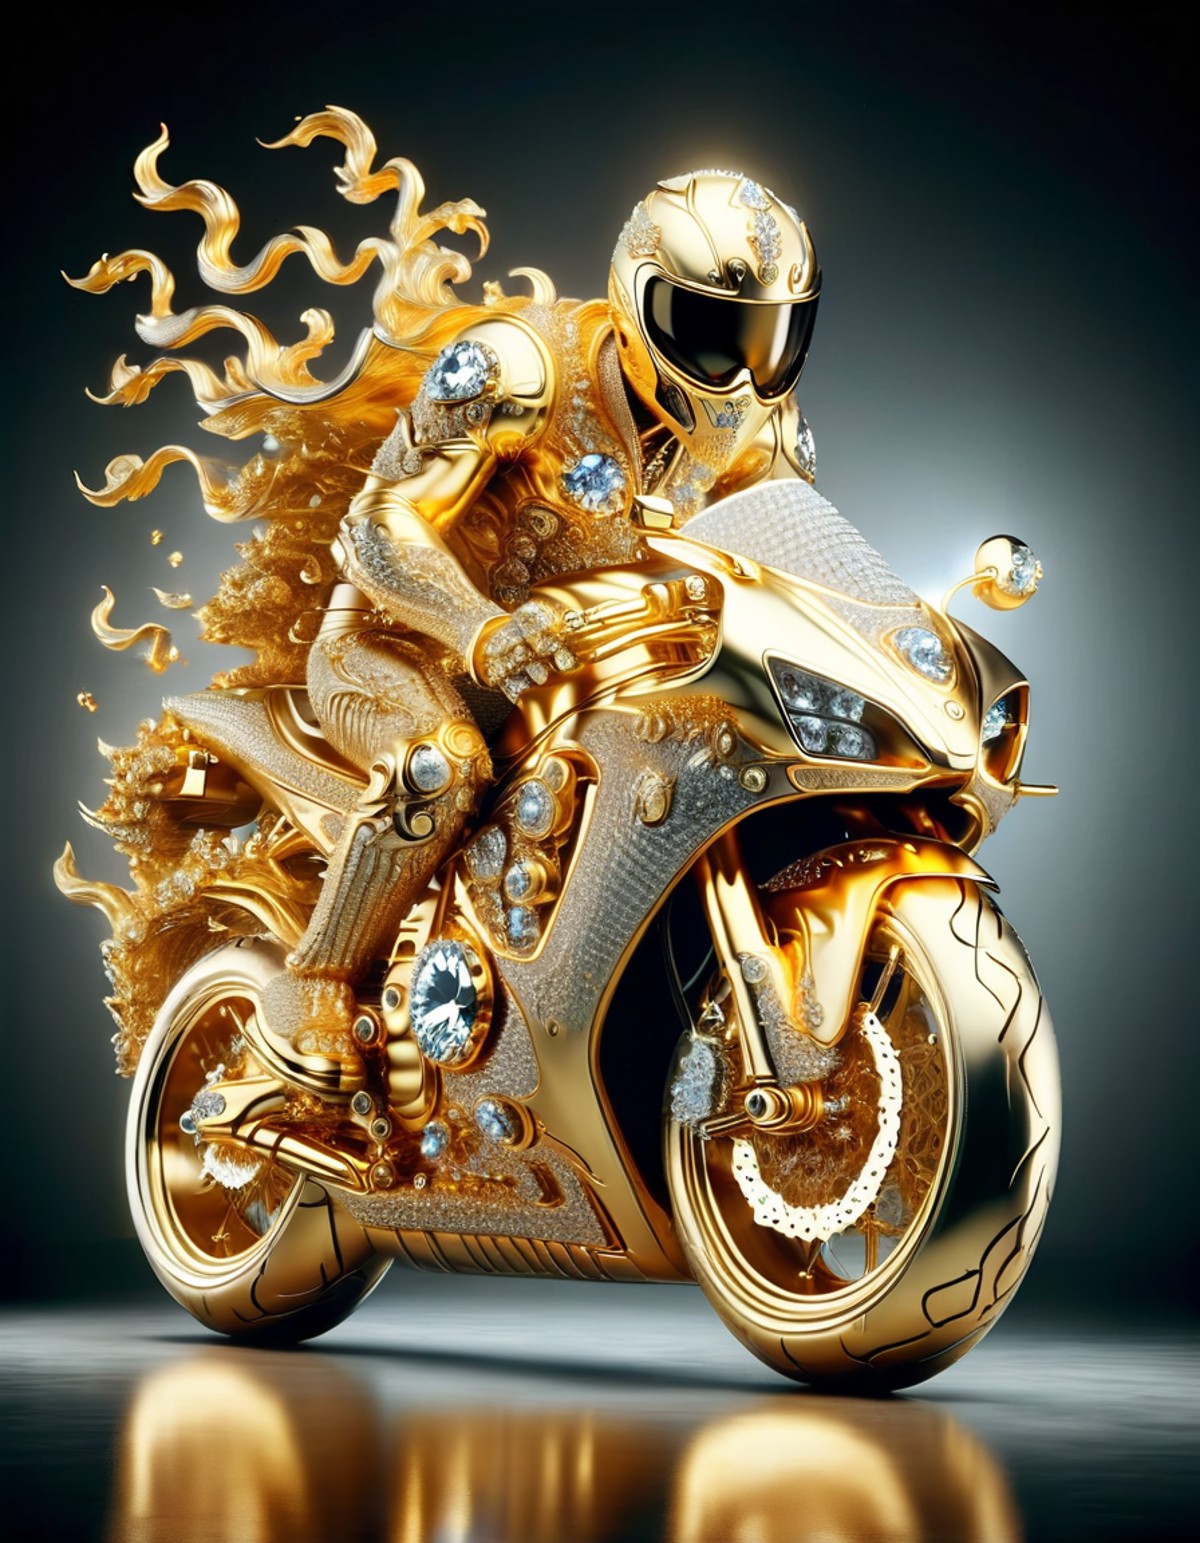 ral-bling, motorcycle, with gold exhaust, skeleton with diamond gear riding the bike, burnout with flames on the road, at ...